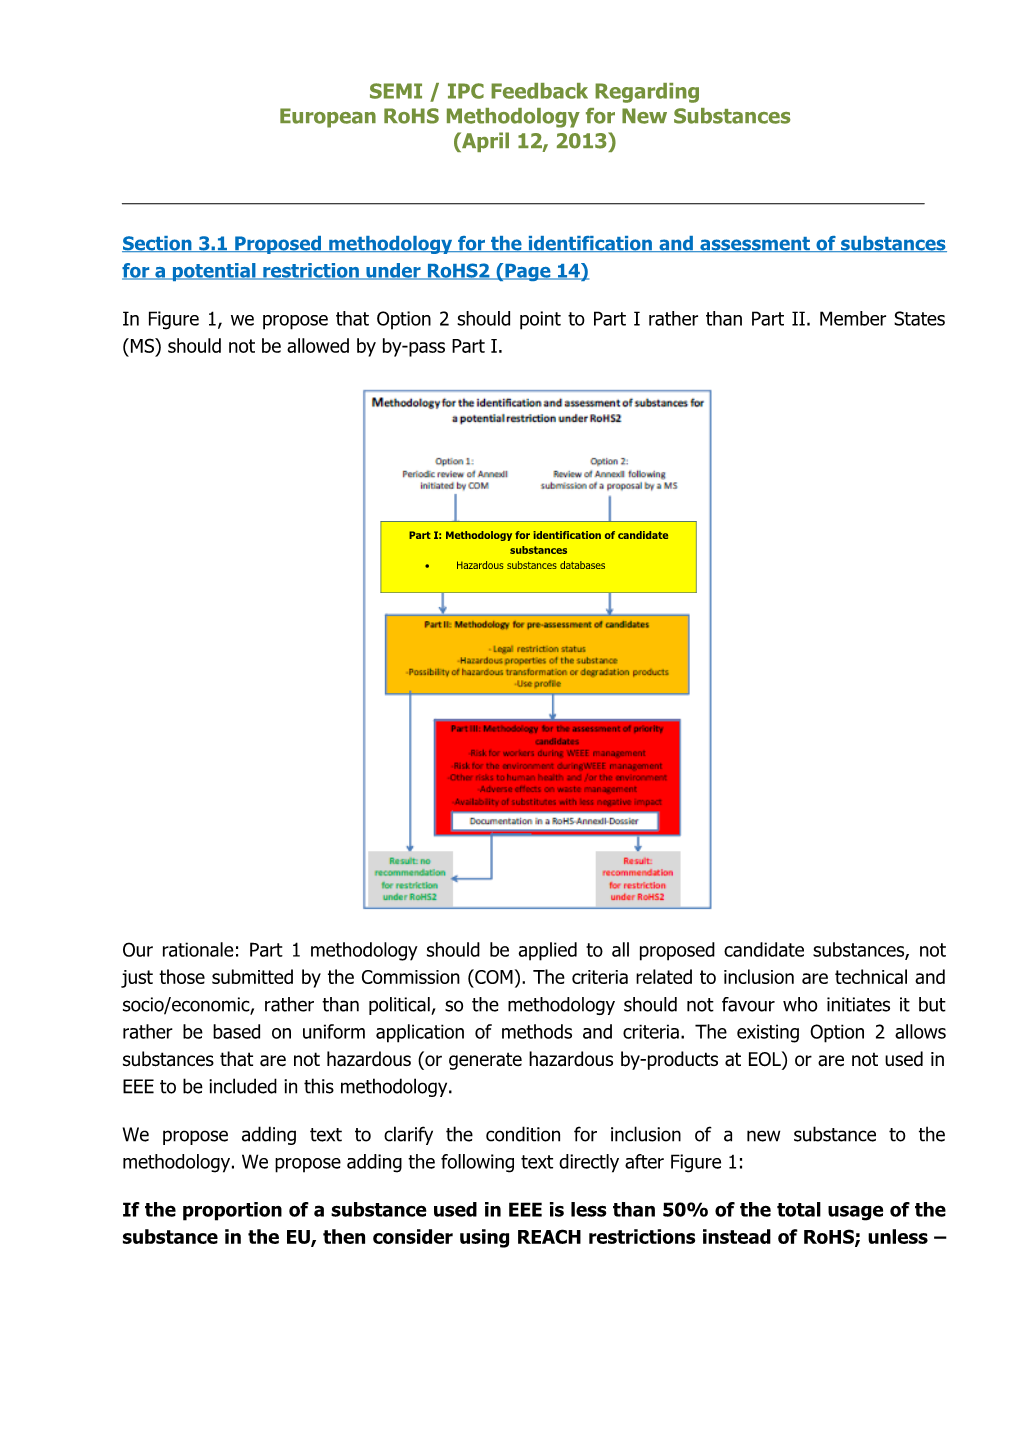 Section 3.1 Proposed Methodology for the Identification Andassessment of Substances For